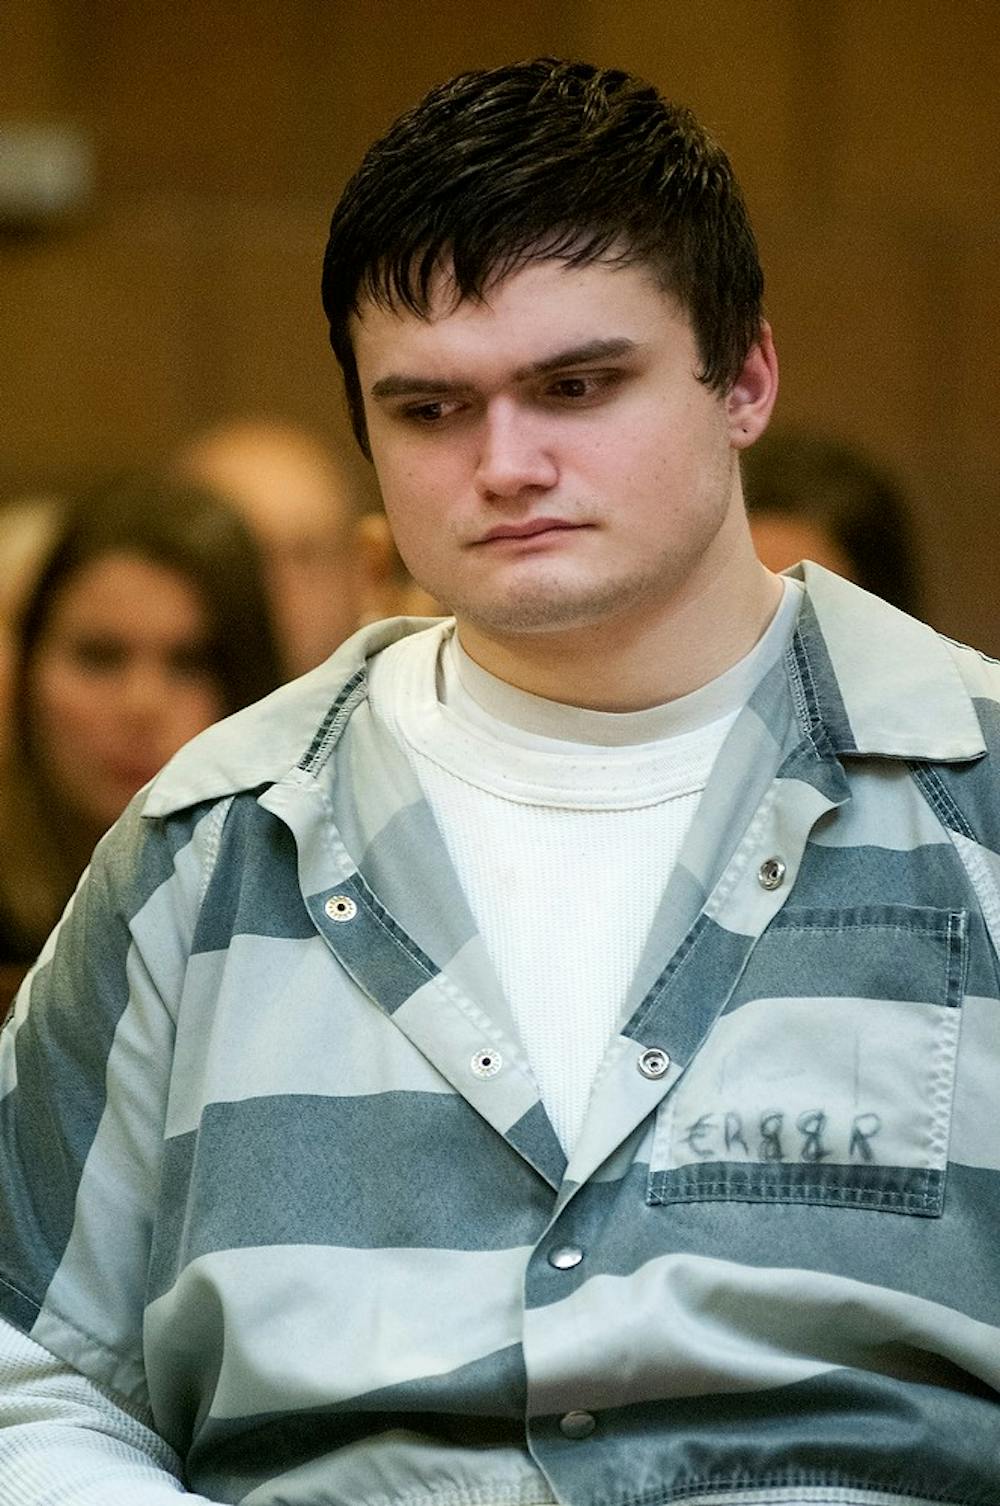 	<p>Okemos resident Connor McCowan sits inside the courtroom during the preliminary exam of the fatal stabbing of <span class="caps">MSU</span> student Andrew Singler on April 18, 2013, at Ingham County District Judge Donald Allen&#8217;s courtroom in Mason, Mich. McCowan is standing trial for allegedly killing 23-year-old Singler in February. Natalie Kolb/The State News</p>